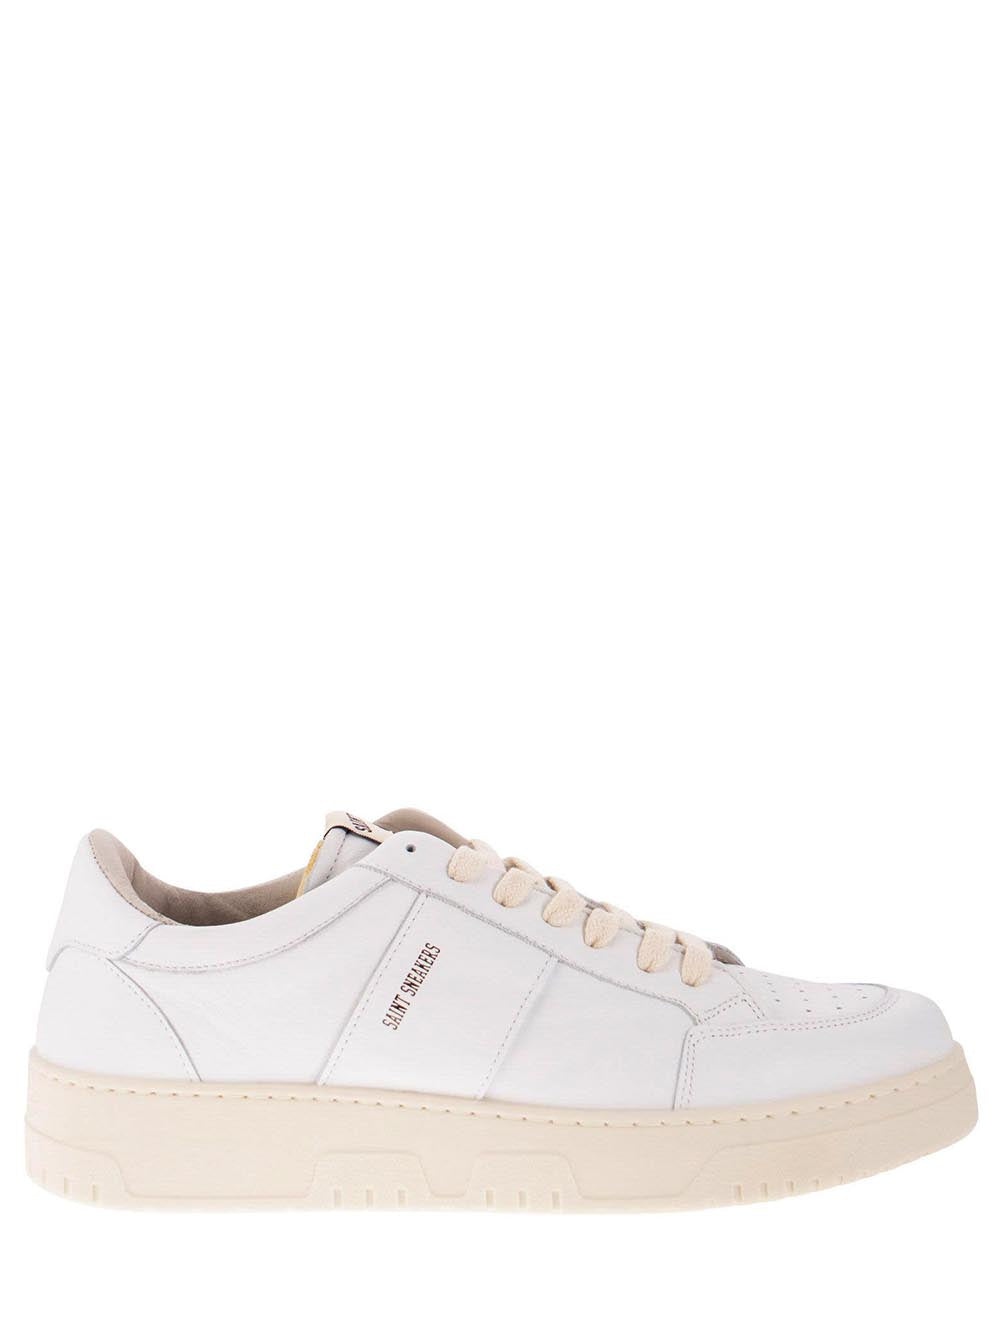 Saint Sneakers Sneakers Donna Golf W Bianco